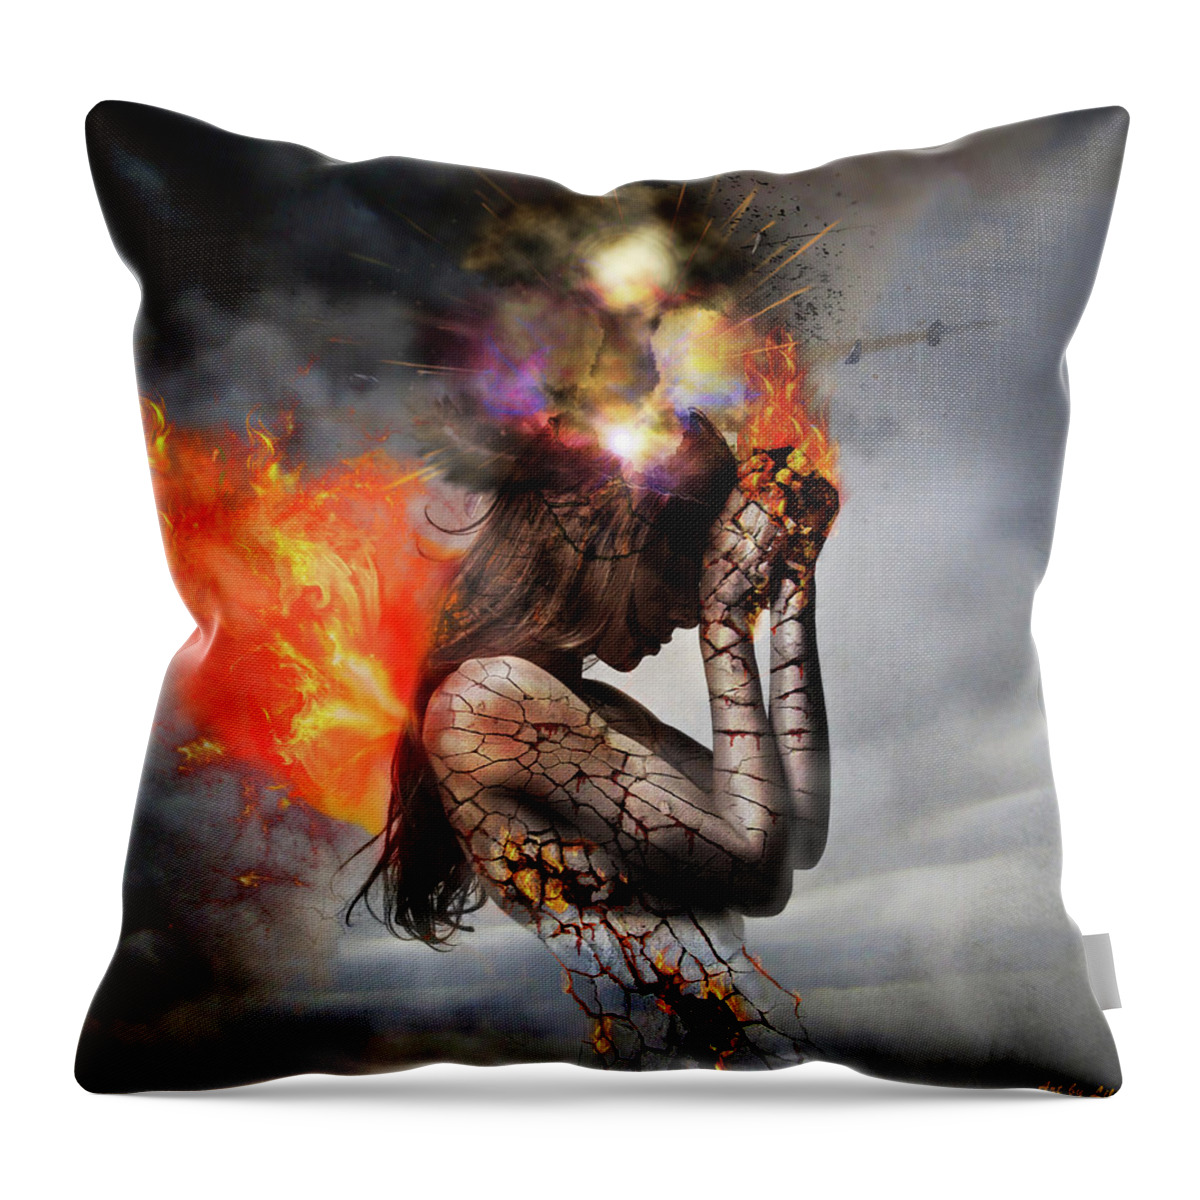 Woman In Pain Throw Pillow featuring the mixed media Pain by Lilia D